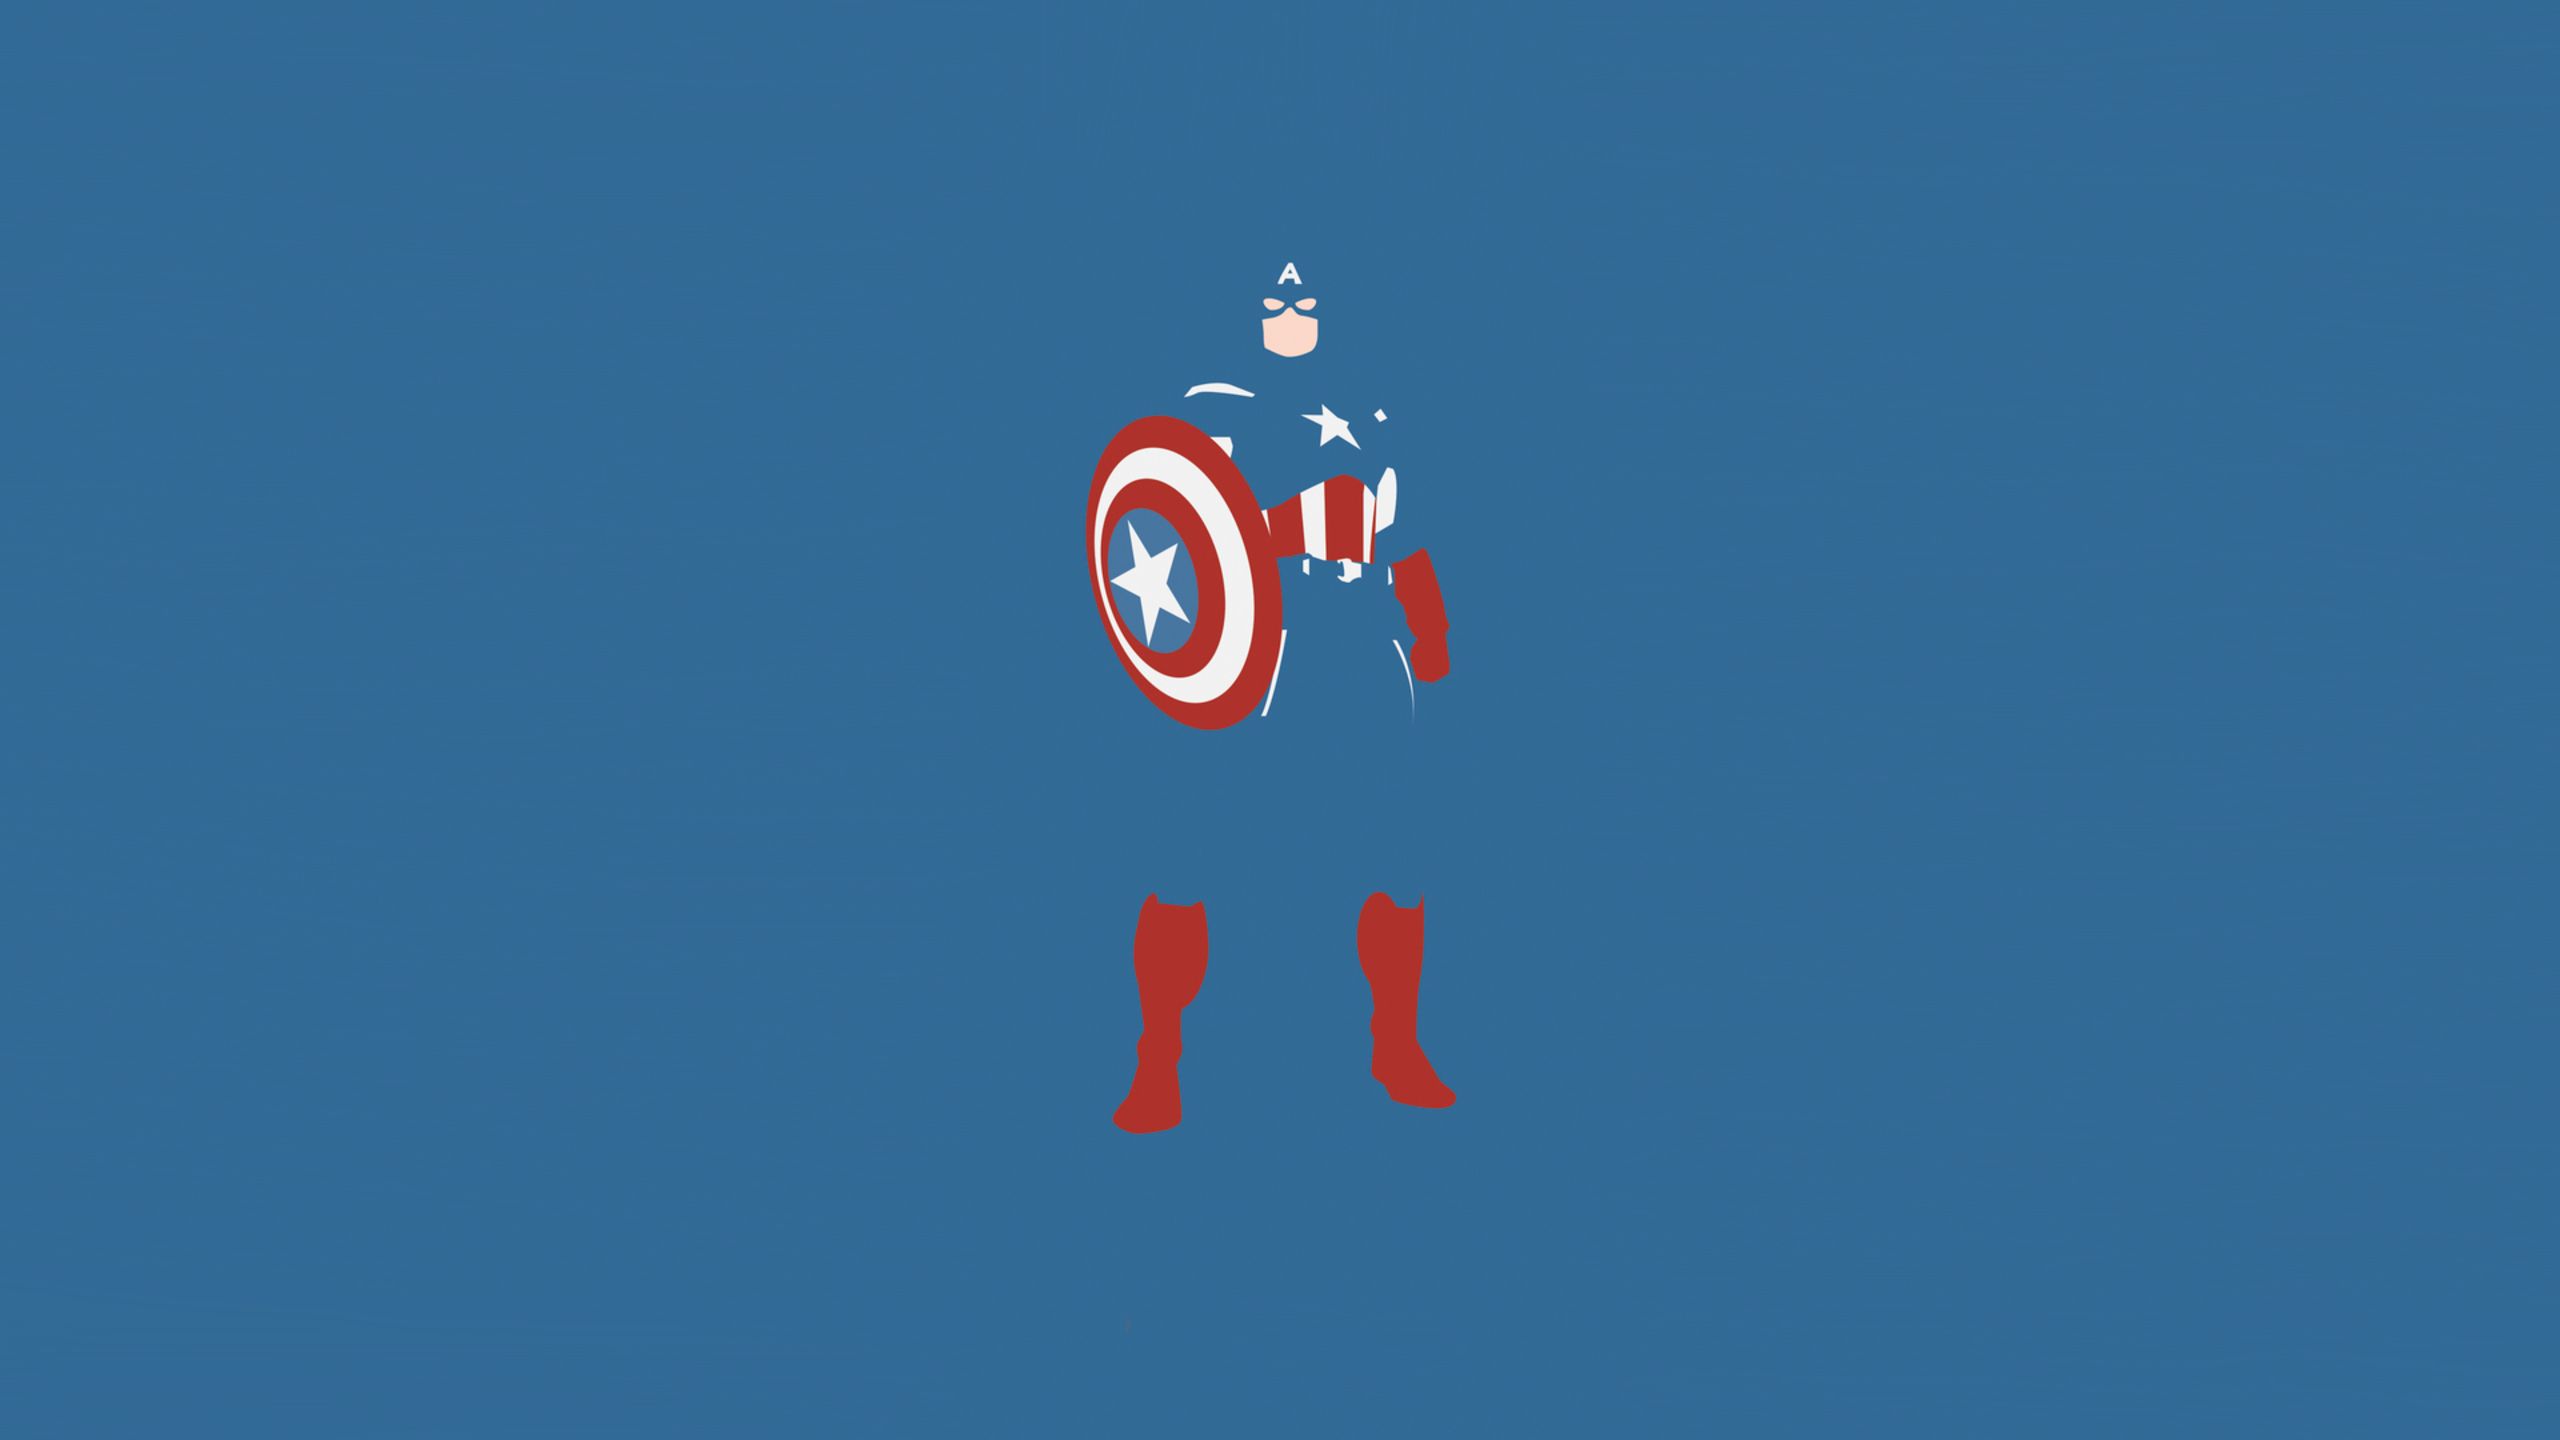 Captain America Marvel Comics Minimalism 1440P Resolution HD 4k Wallpaper, Image, Background, Photo and Picture